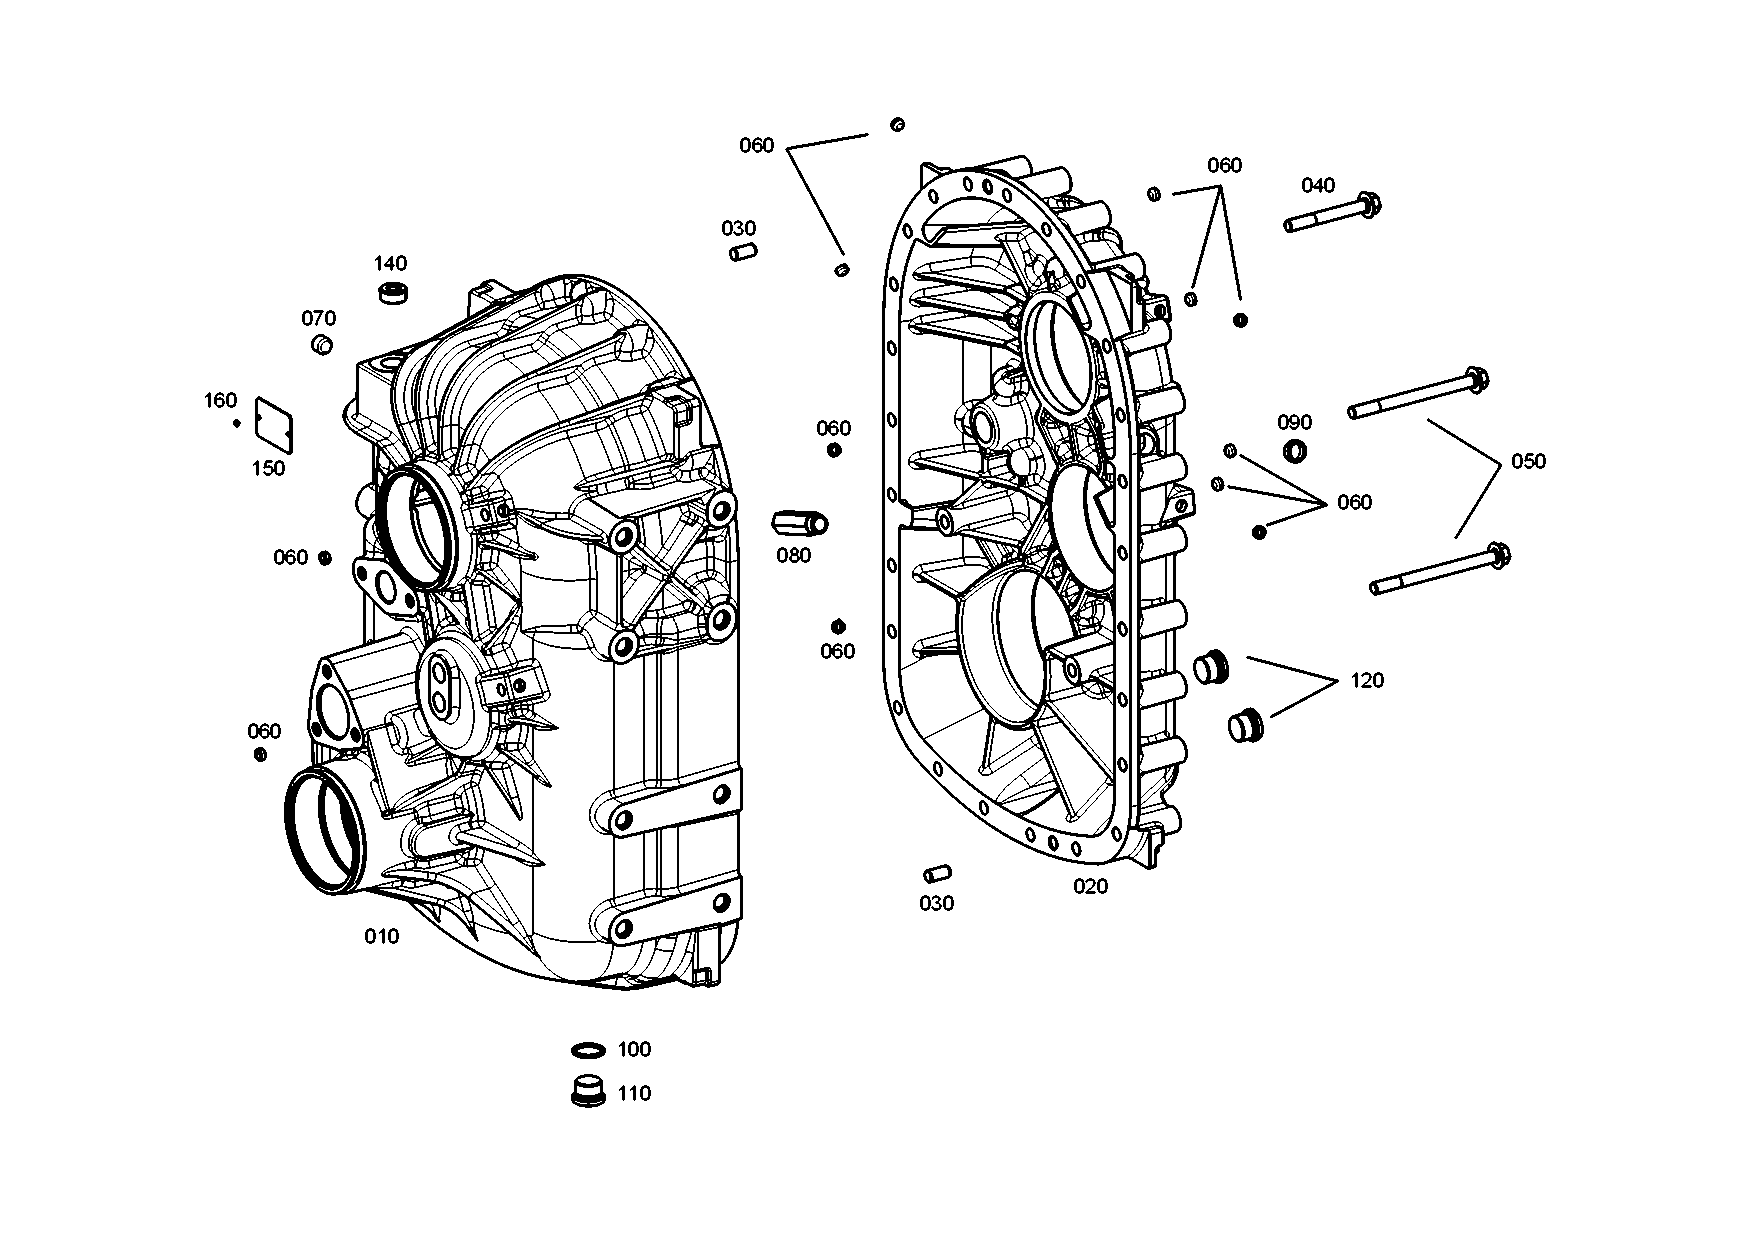 drawing for MAGNA STEYR 170750210002 - HOUSING REAR SECTION (figure 3)